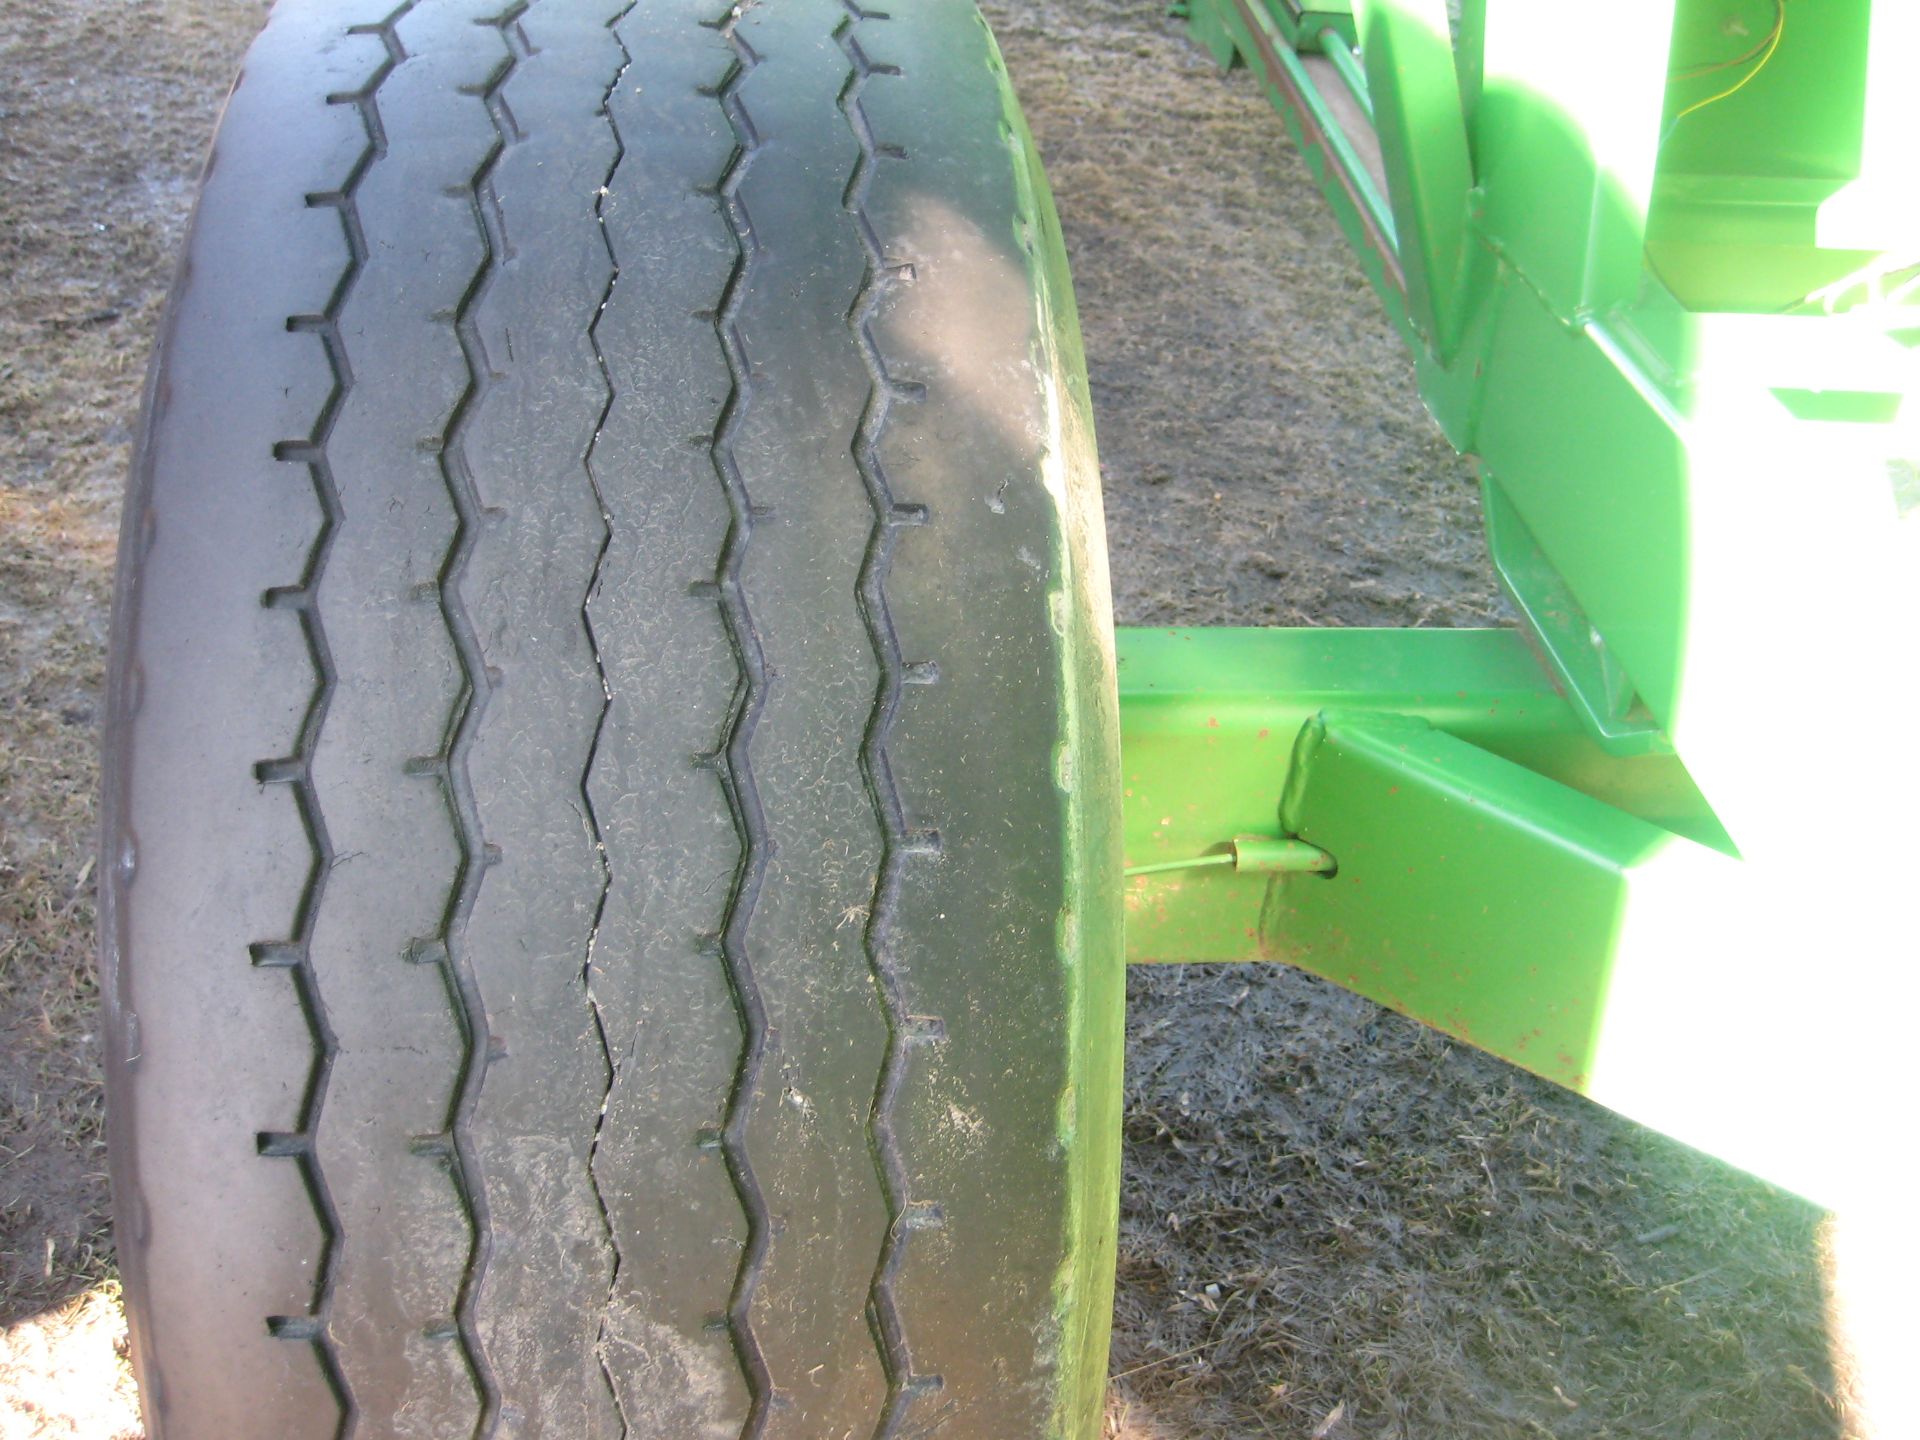 Brent 540 Gravity Wagon, 425-65R/22.5 tires, green - Image 6 of 13